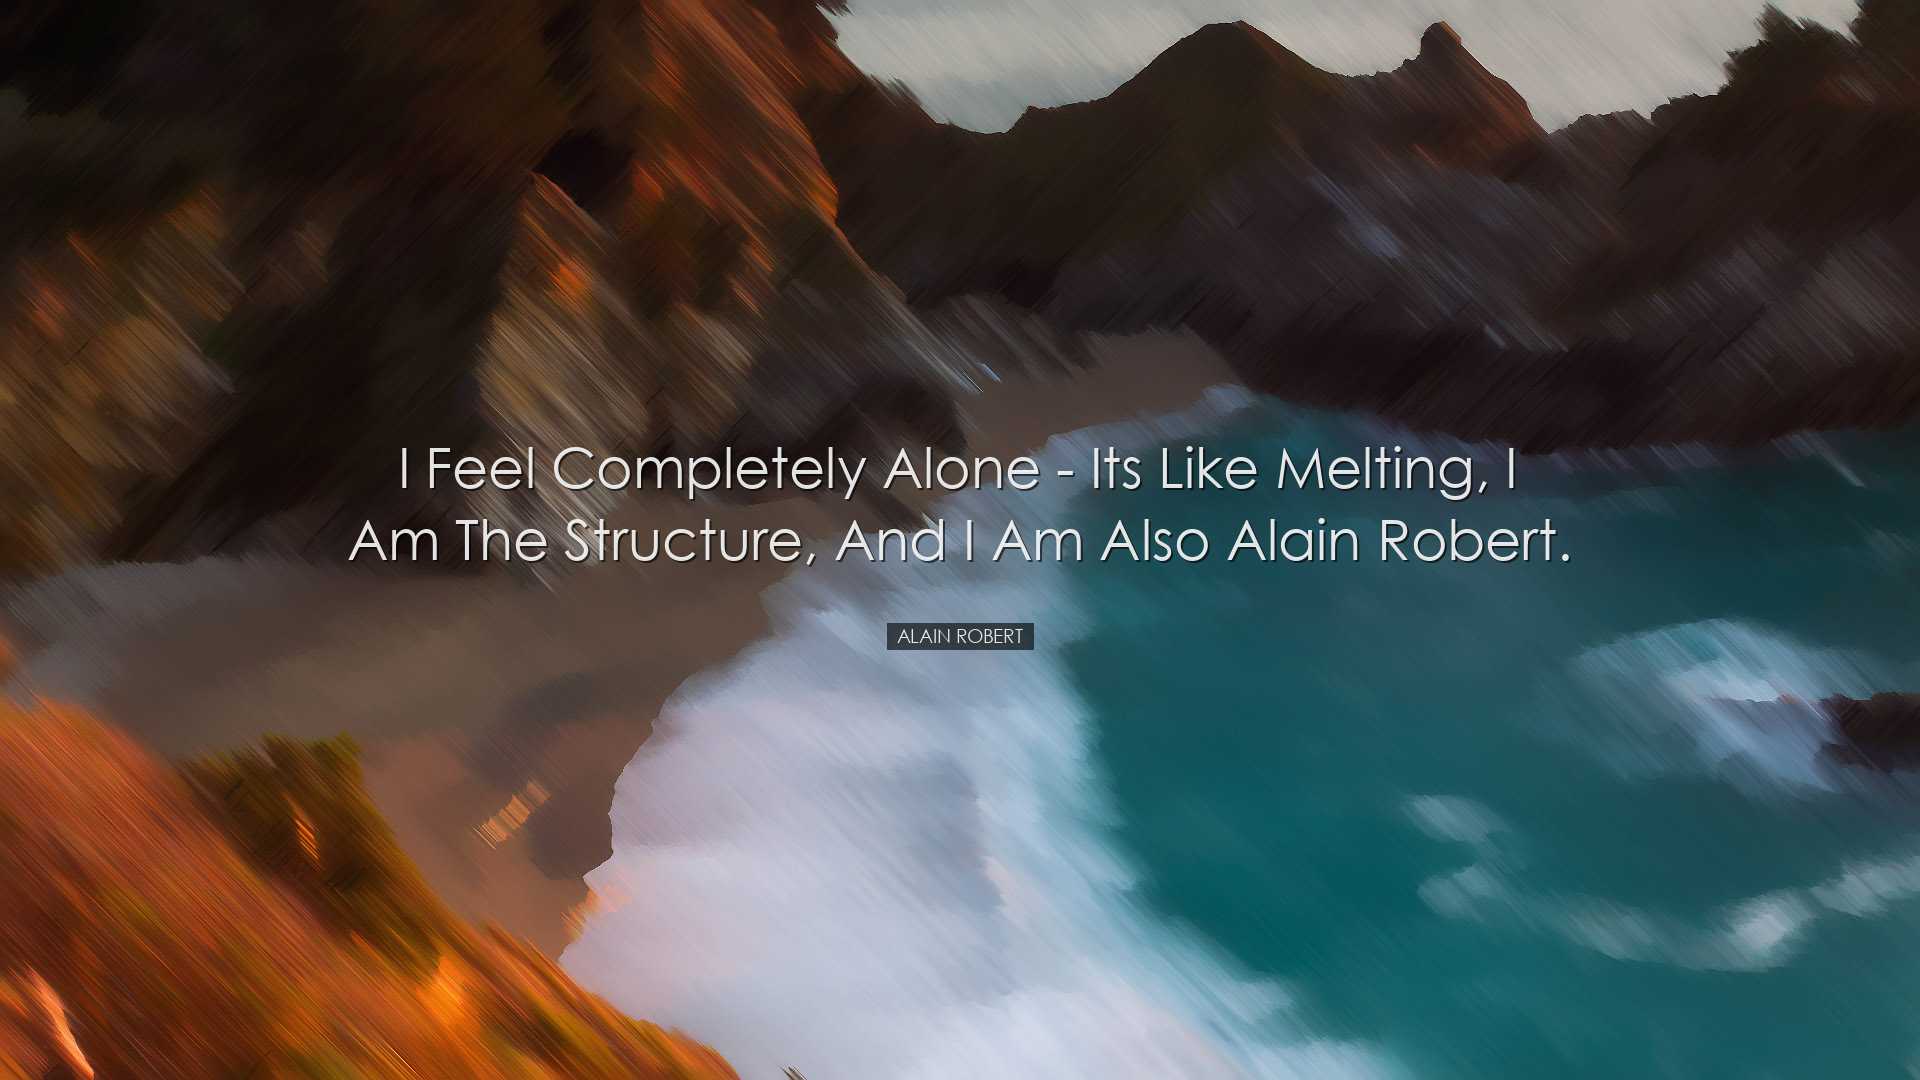 I feel completely alone - its like melting, I am the structure, an